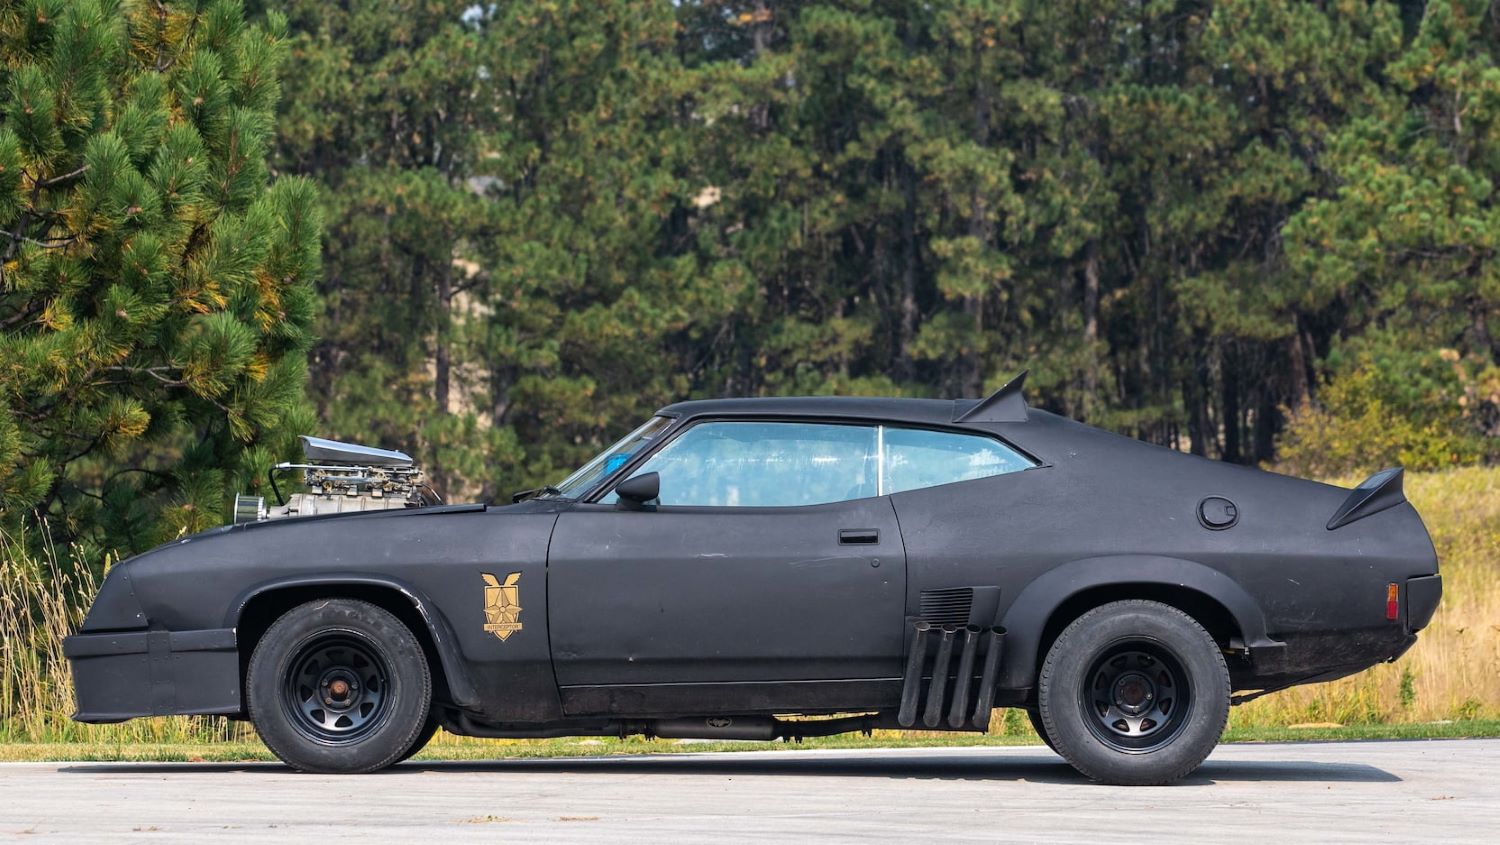 Ford Falcon XB Interceptor 'Mad Max' Replica Is Headed To Auction